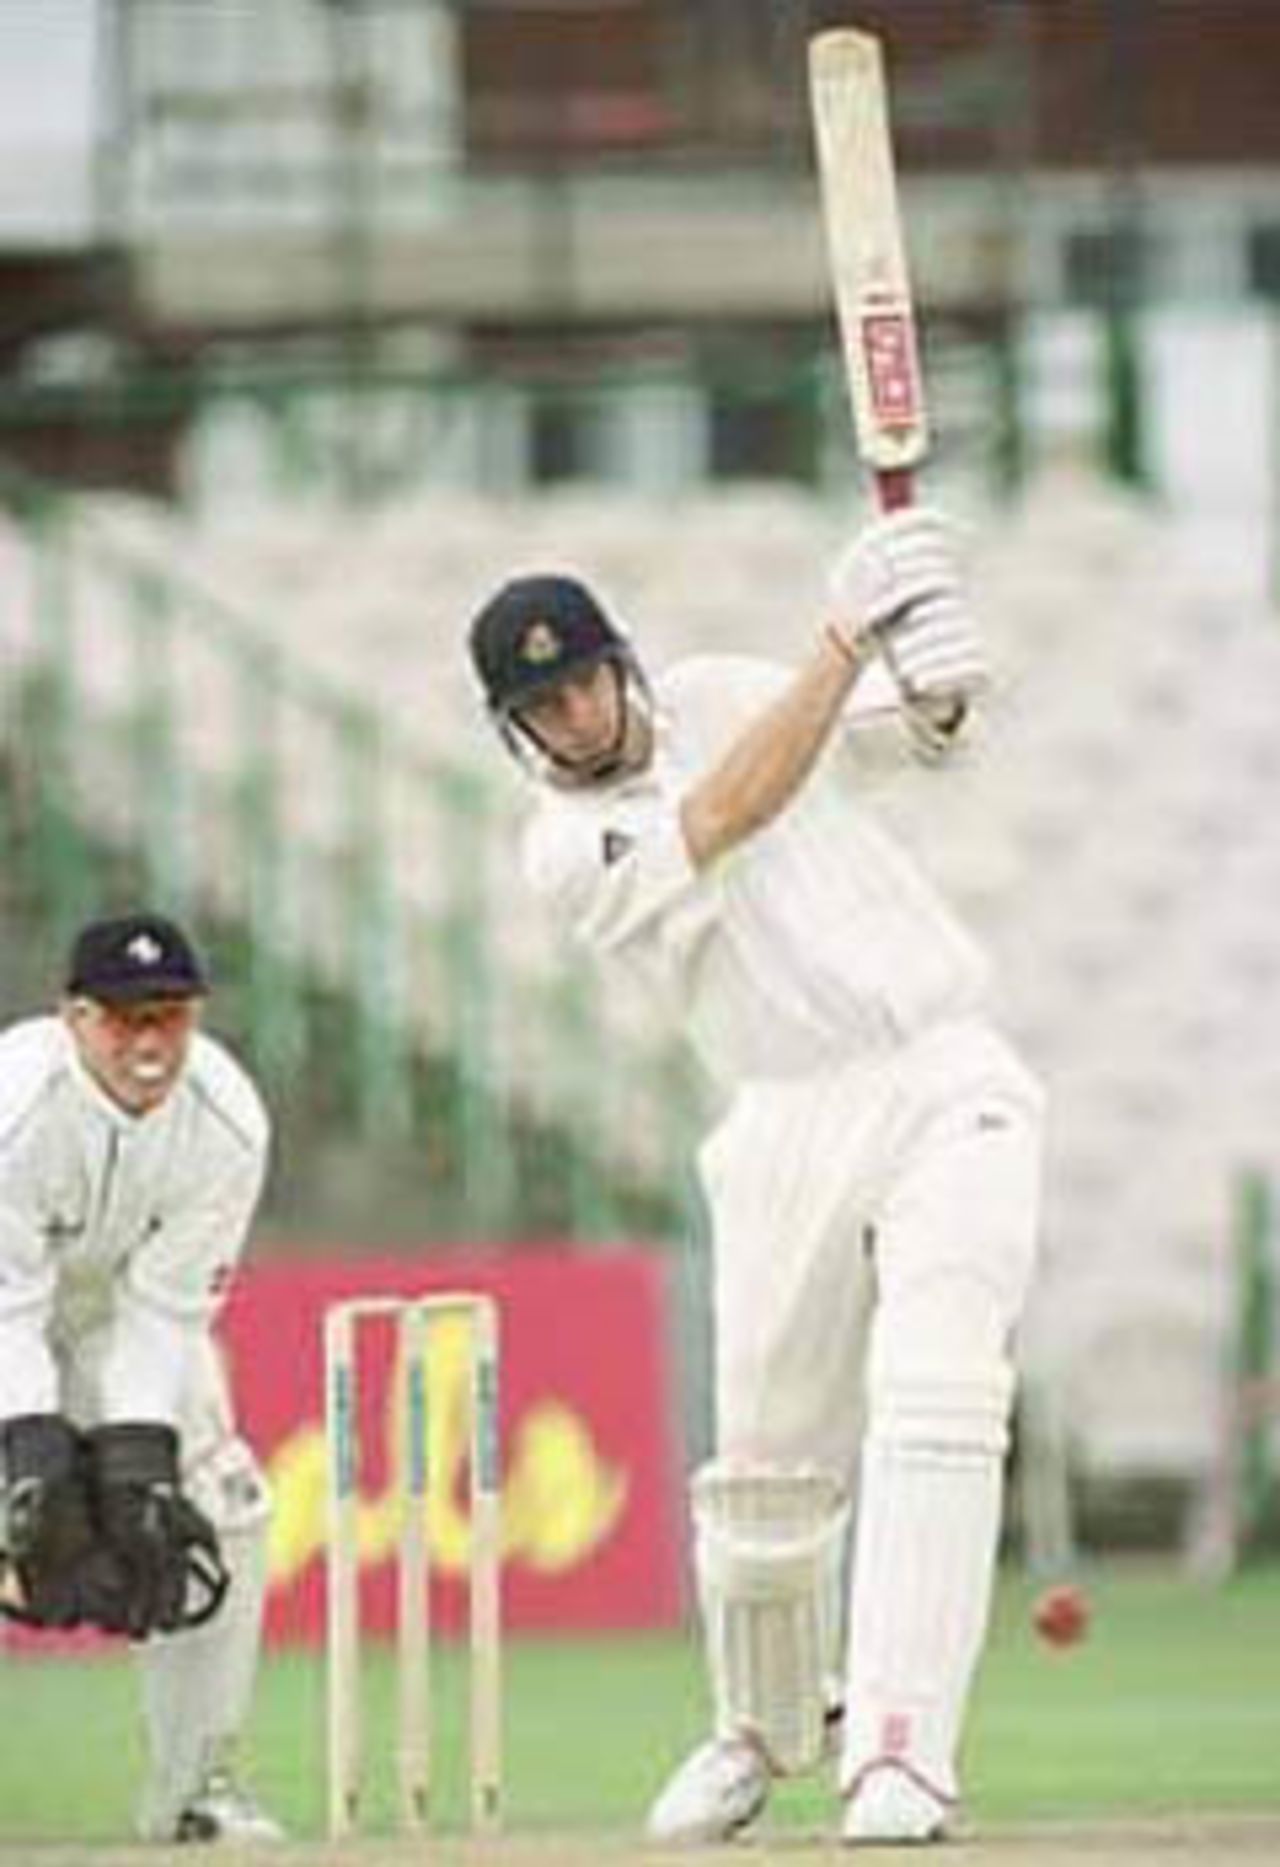 Michael Smethurst straight drives, PPP healthcare County Championship Division One, 2000, Lancashire v Kent, Old Trafford, Manchester, 17-20 August 2000(Day 3).